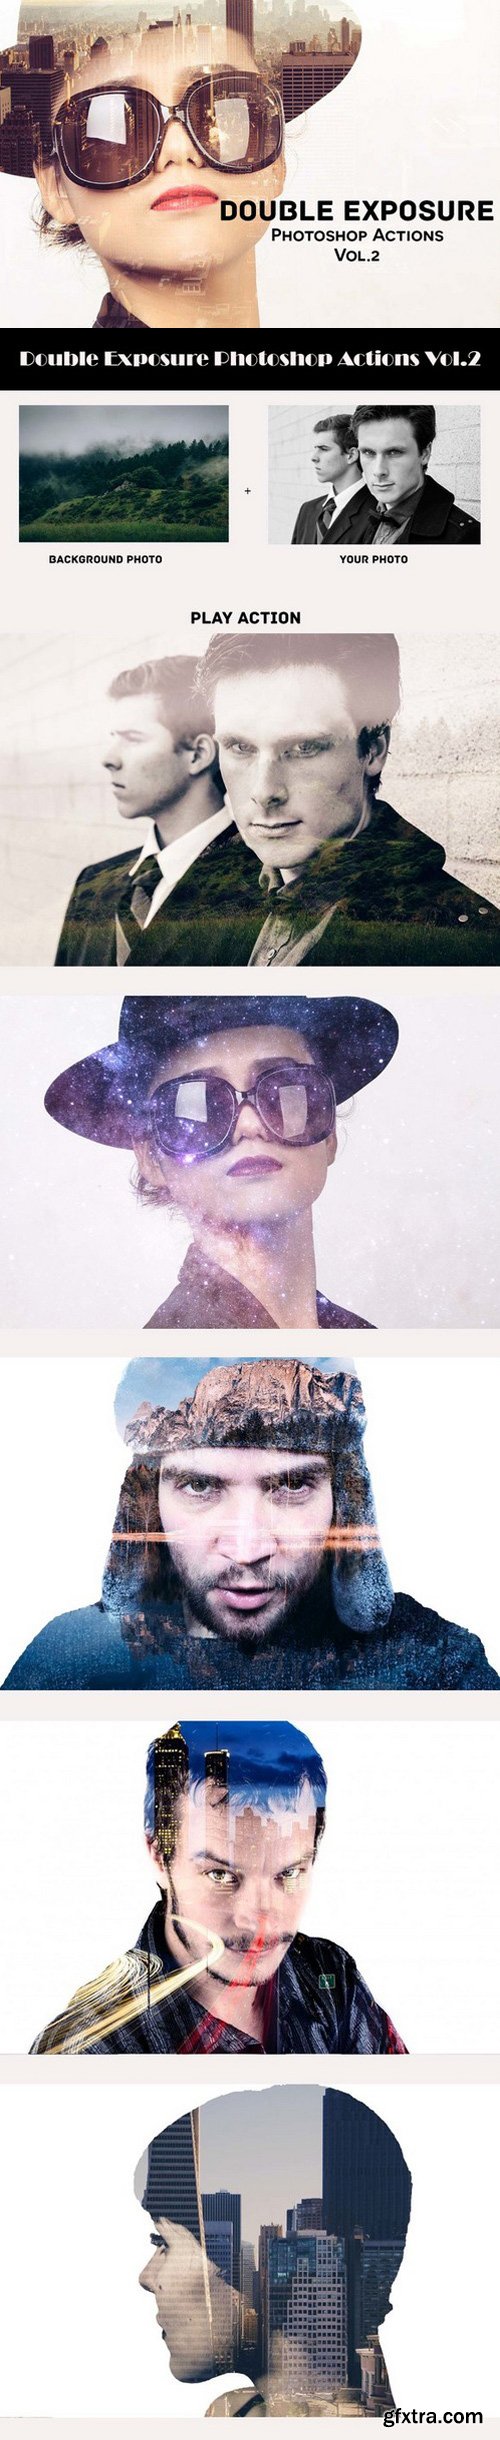 DOUBLE EXPOSURE PHOTOSHOP ACTIONS V2